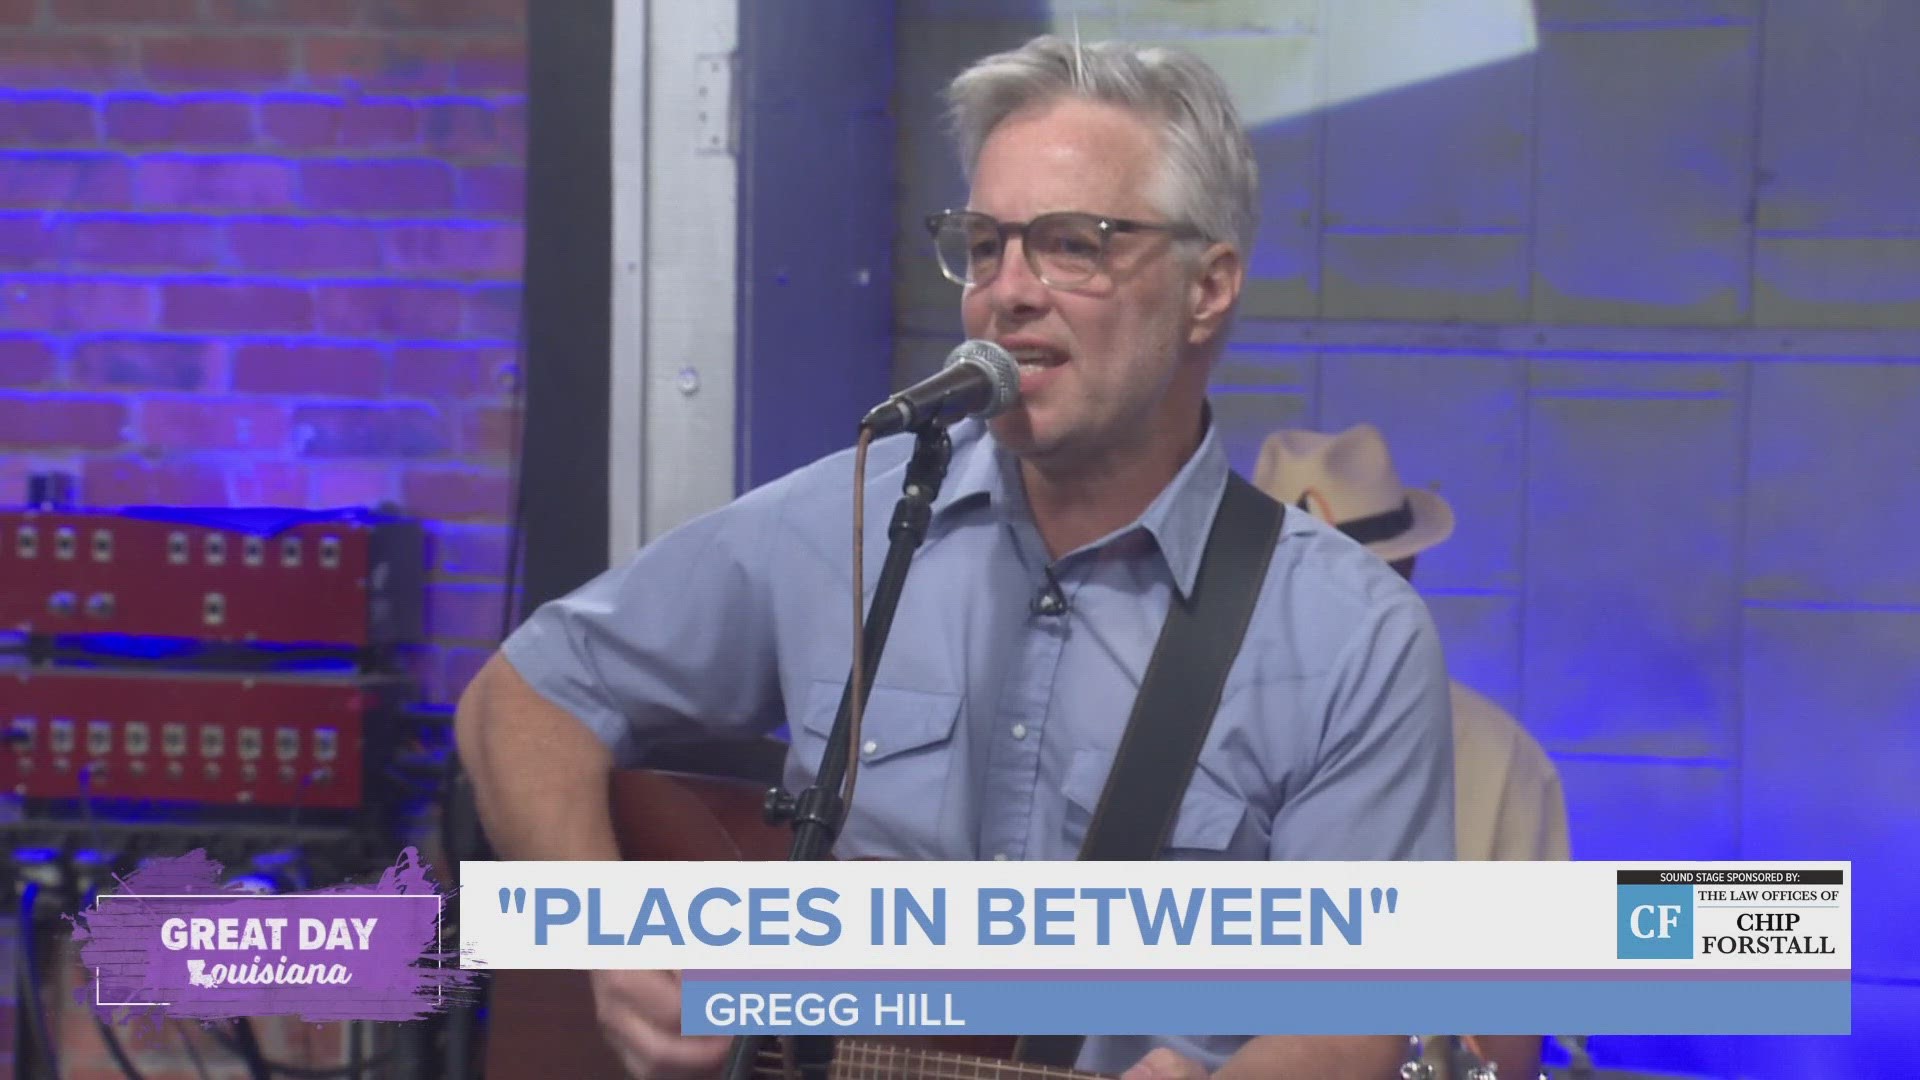 Gregg Hill shares songs from his new album, "Bayou St. John" and shares some of the amazing local musicians who joined him on the album.